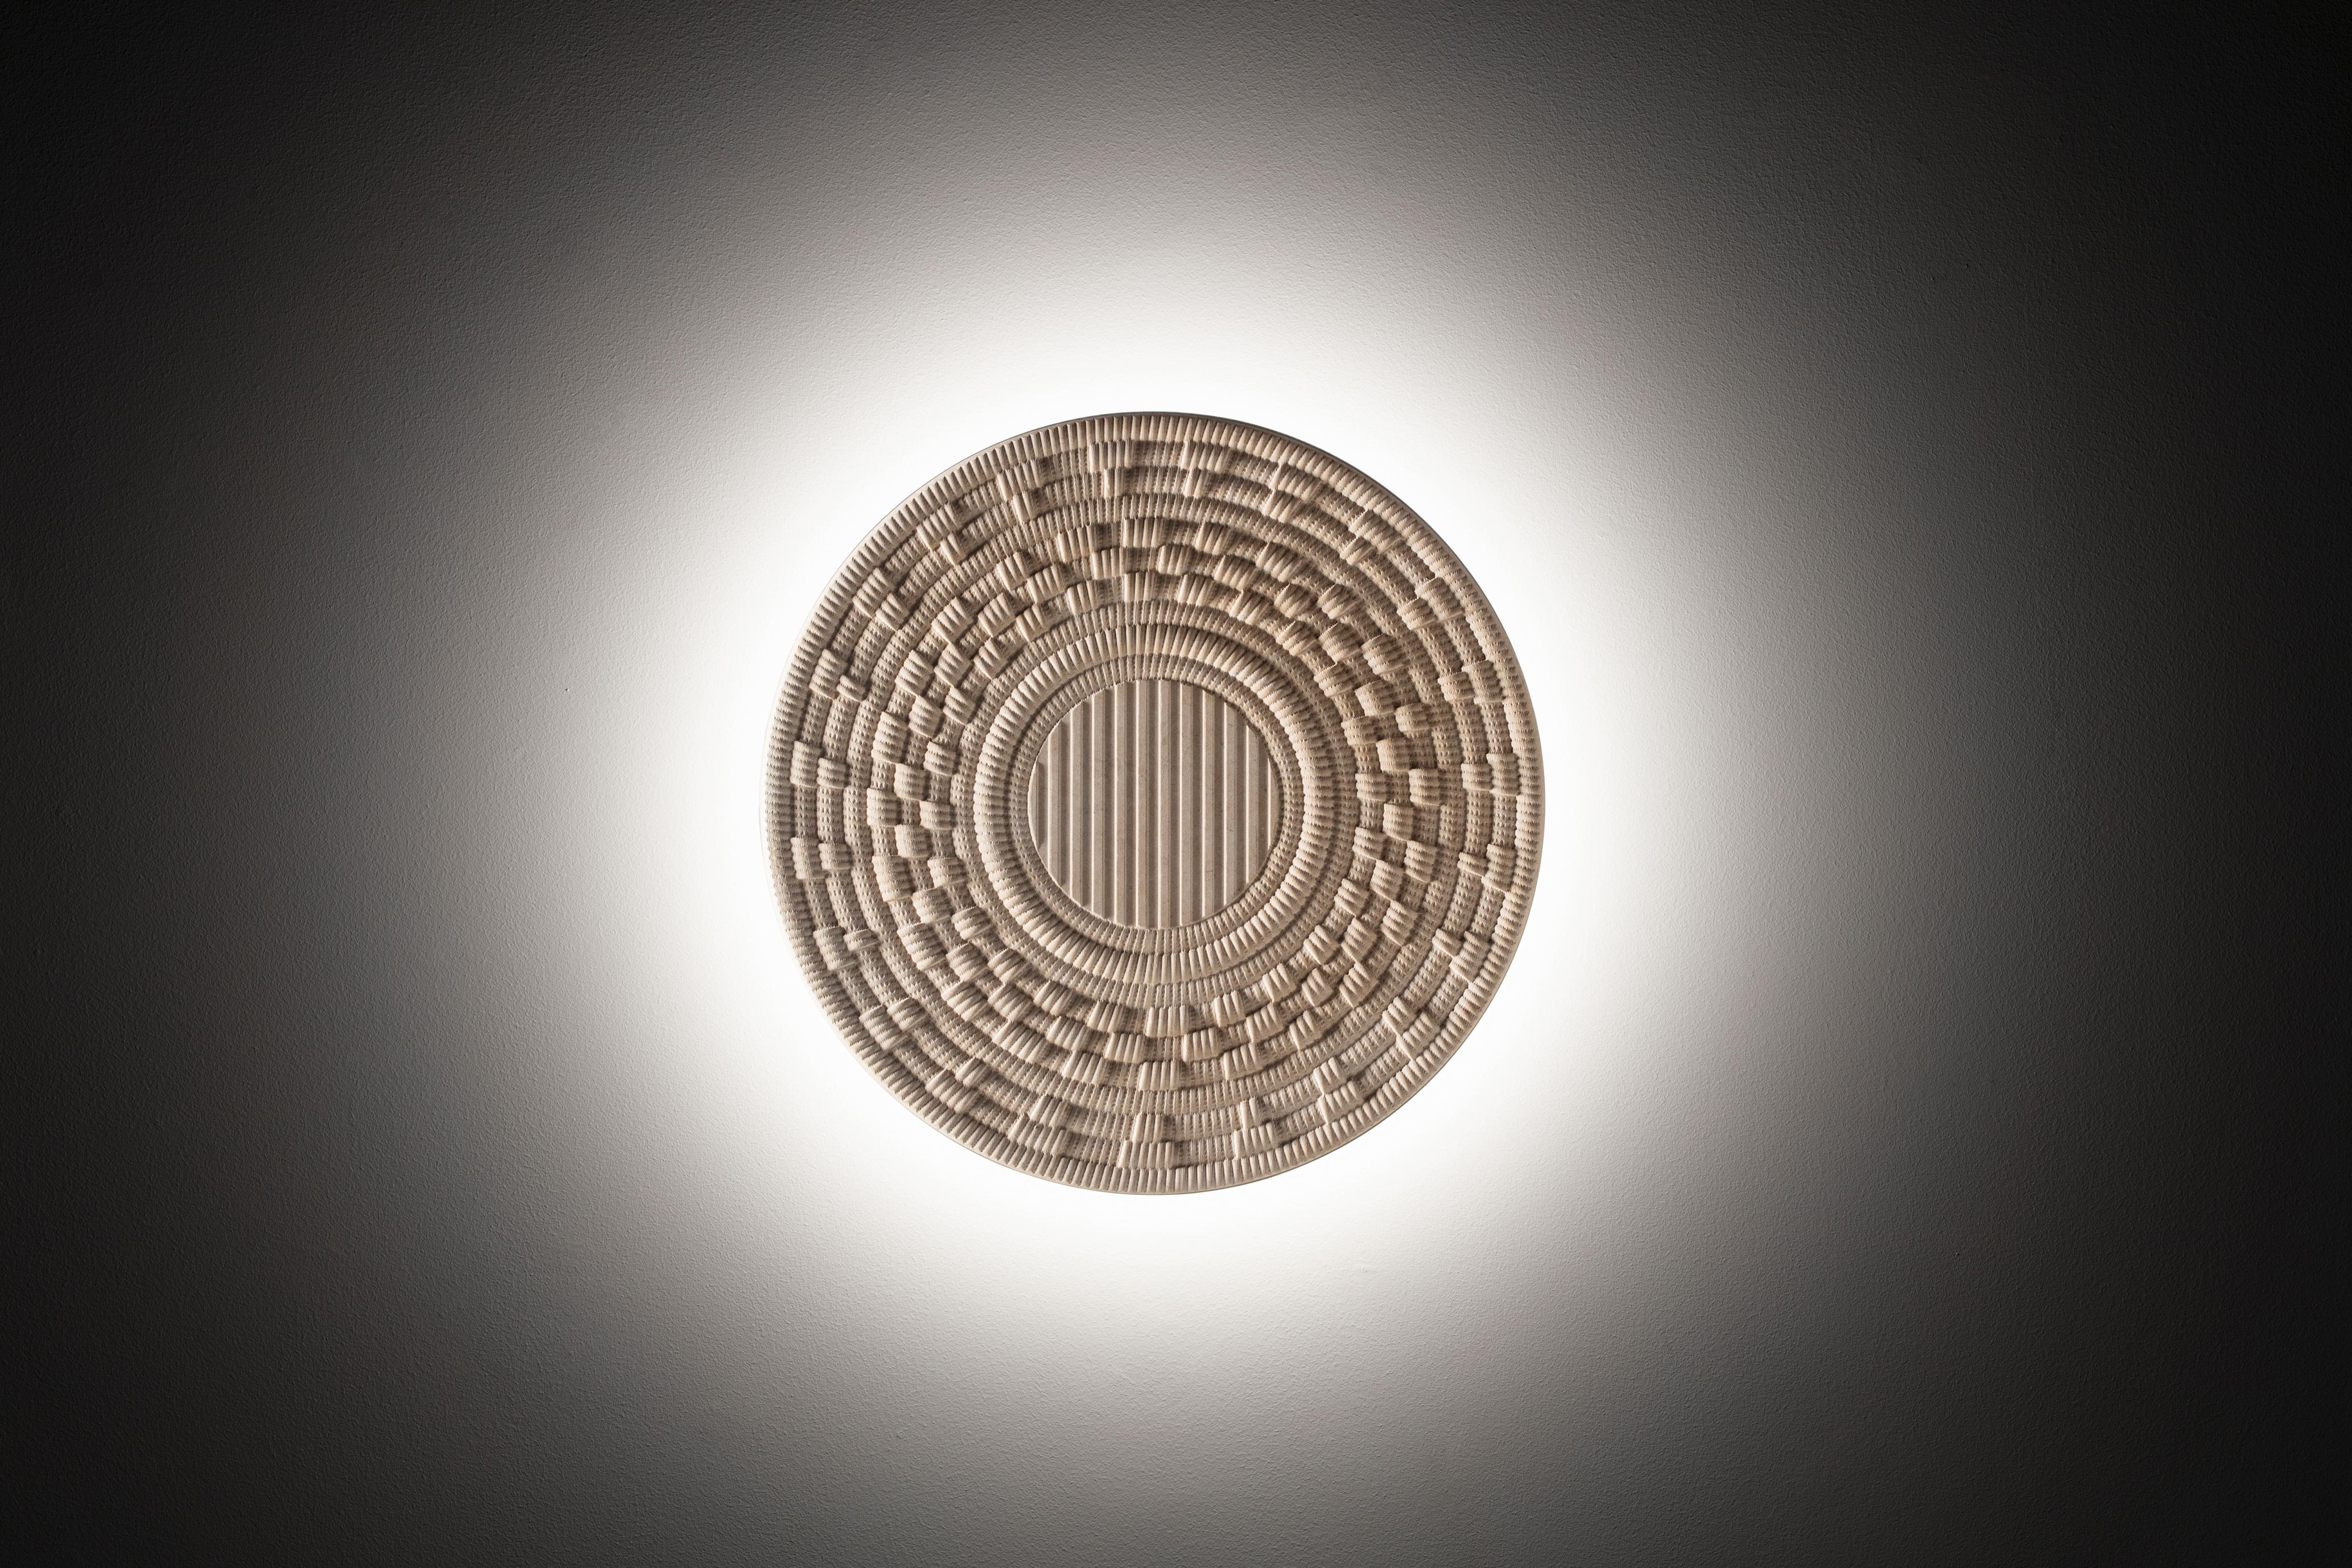 Corbulas 70
This superb, three-dimensional round panel is fashioned of Crema Tunisi stone. The pattern reproduced on the surface evokes the elaborate underside of traditional Sardinian baskets, used to hold and measure flour as well as colorful